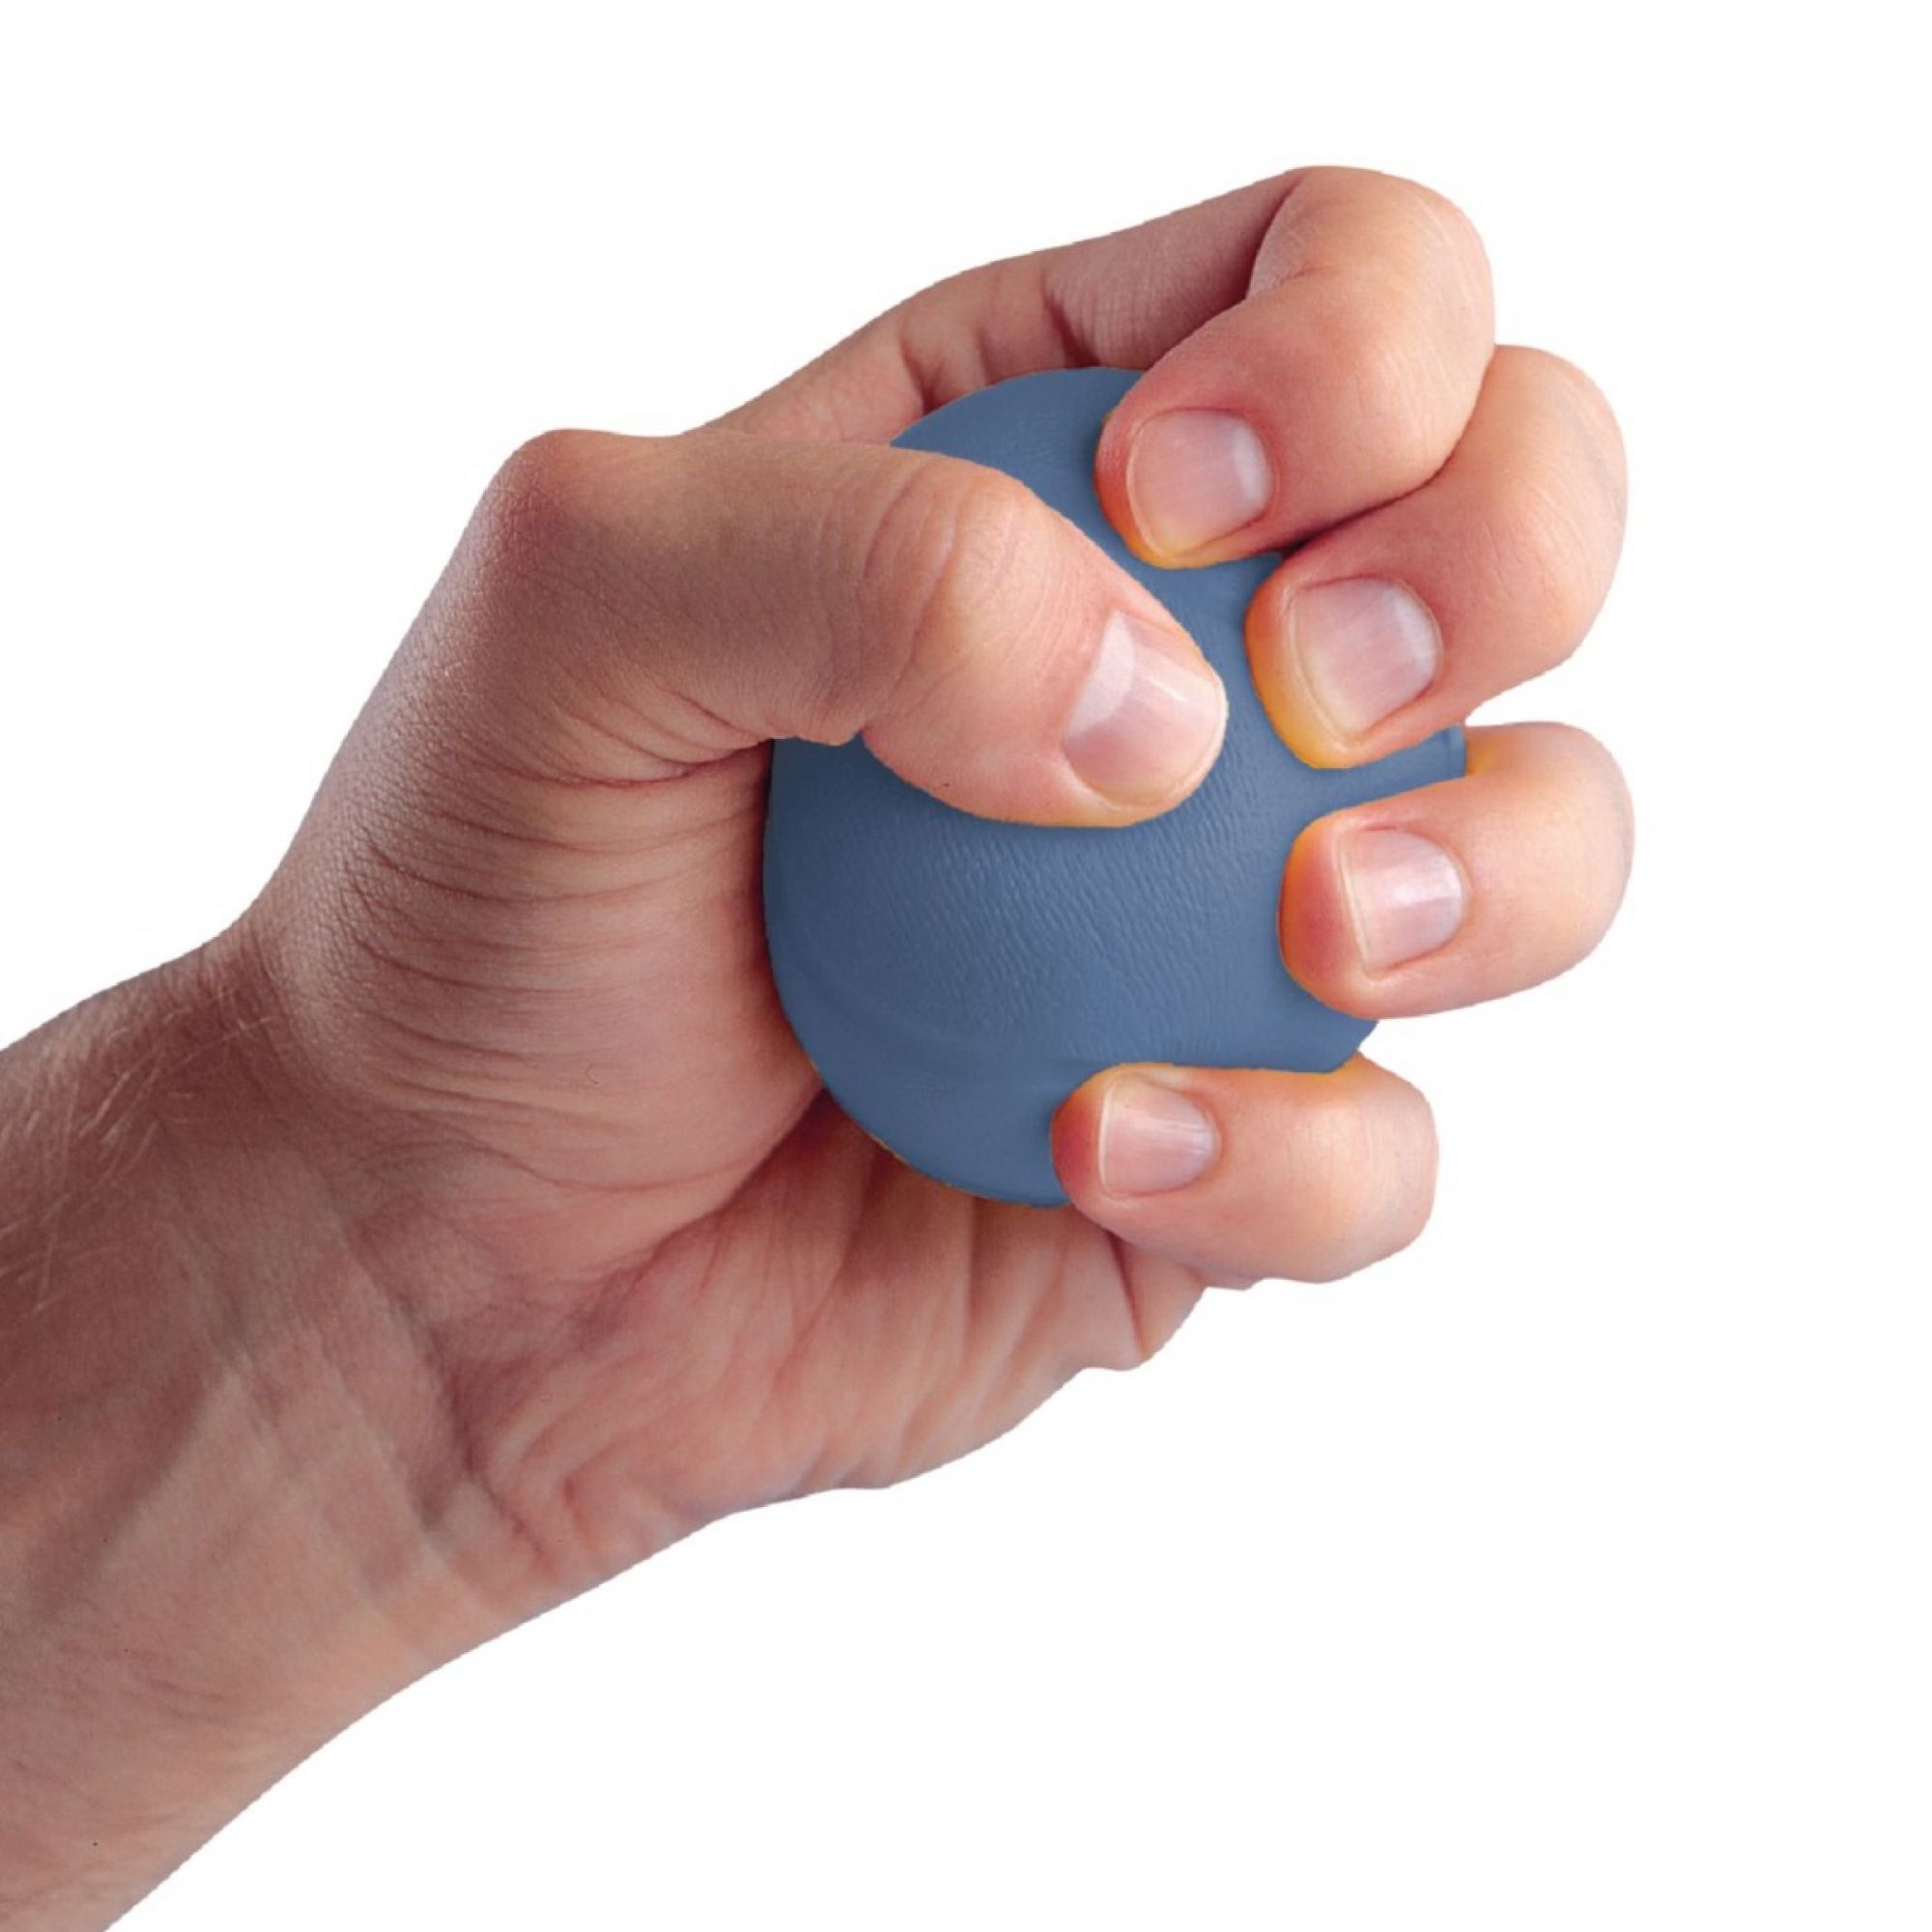 Squeeze Ball Hand Exerciser FOR SALE - FREE Shipping